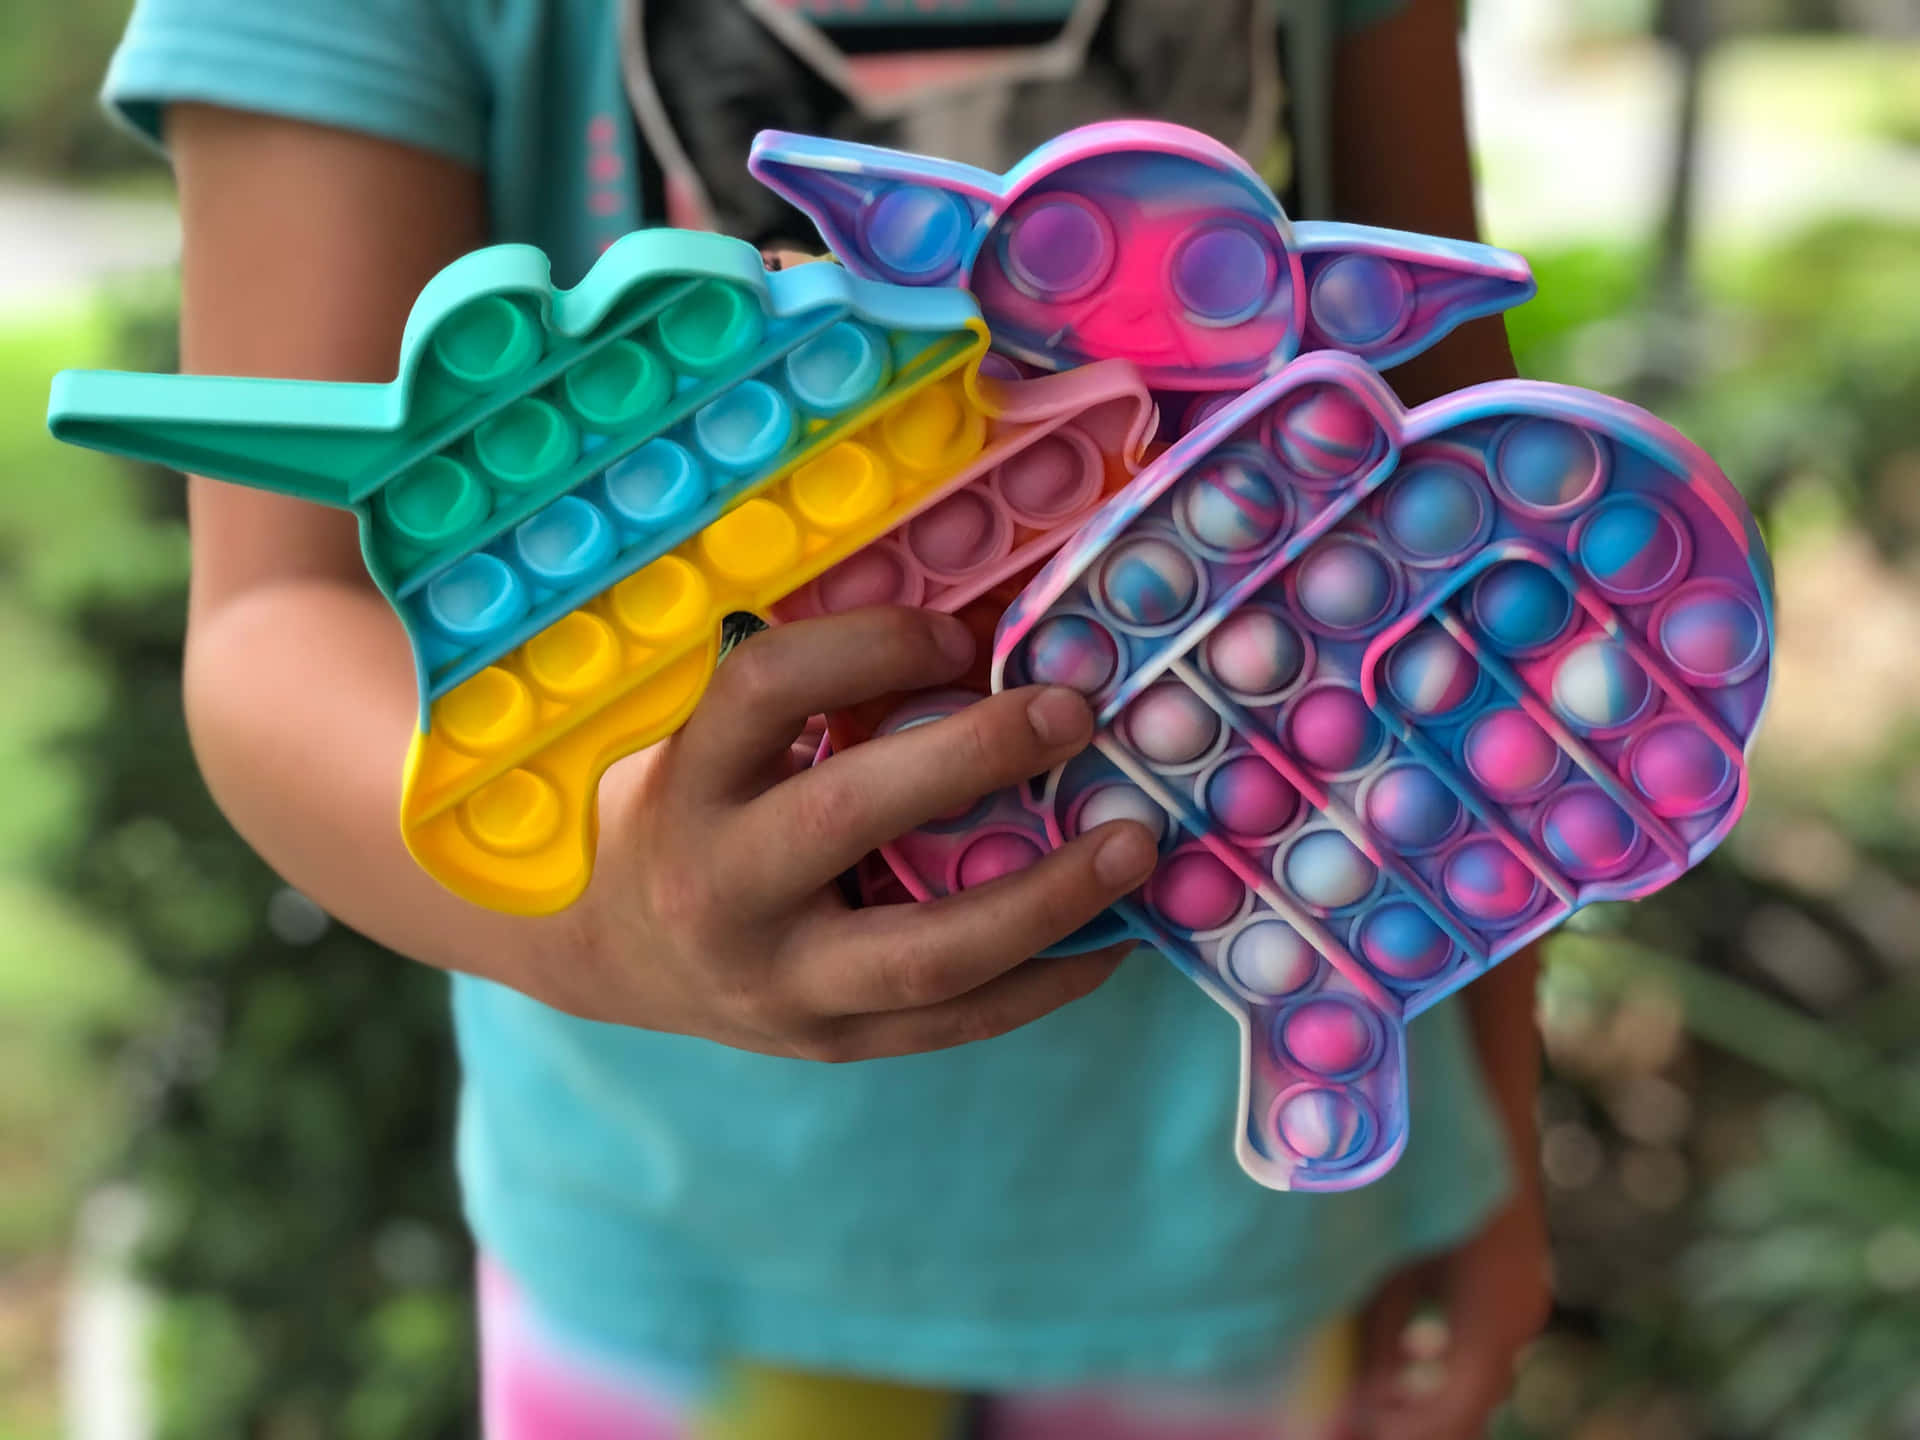 A Girl Holding A Colorful Toy With A Unicorn On It